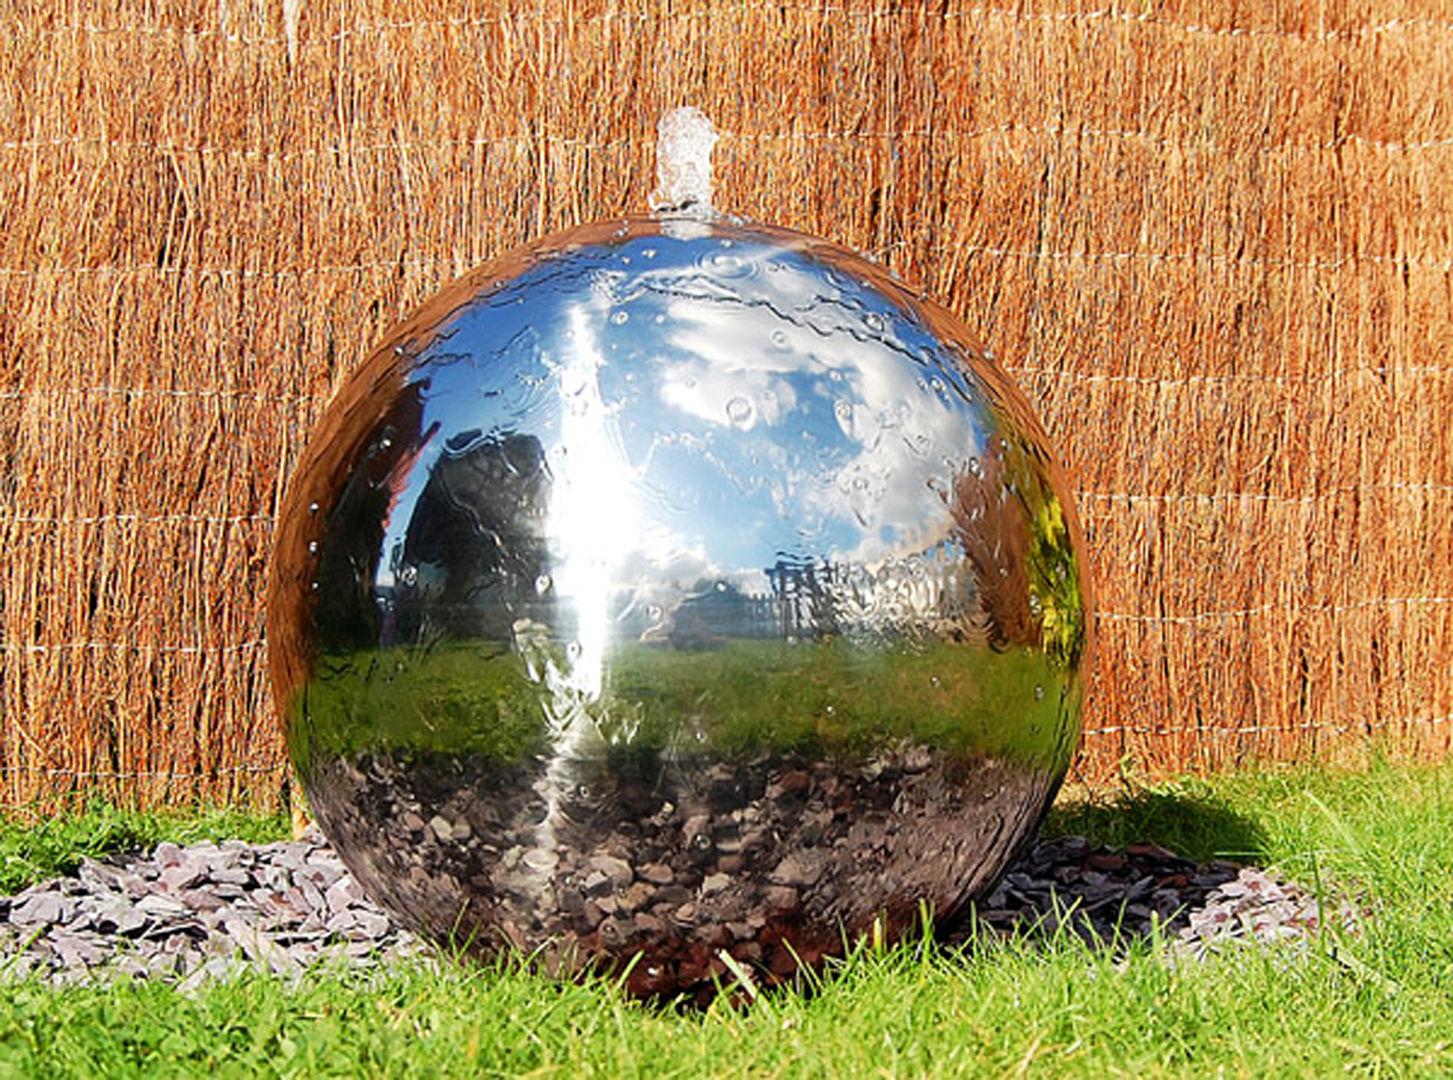 Polished 28cm Stainless Steel Sphere Water Feature Primrose Vườn phong cách hiện đại Accessories & decoration